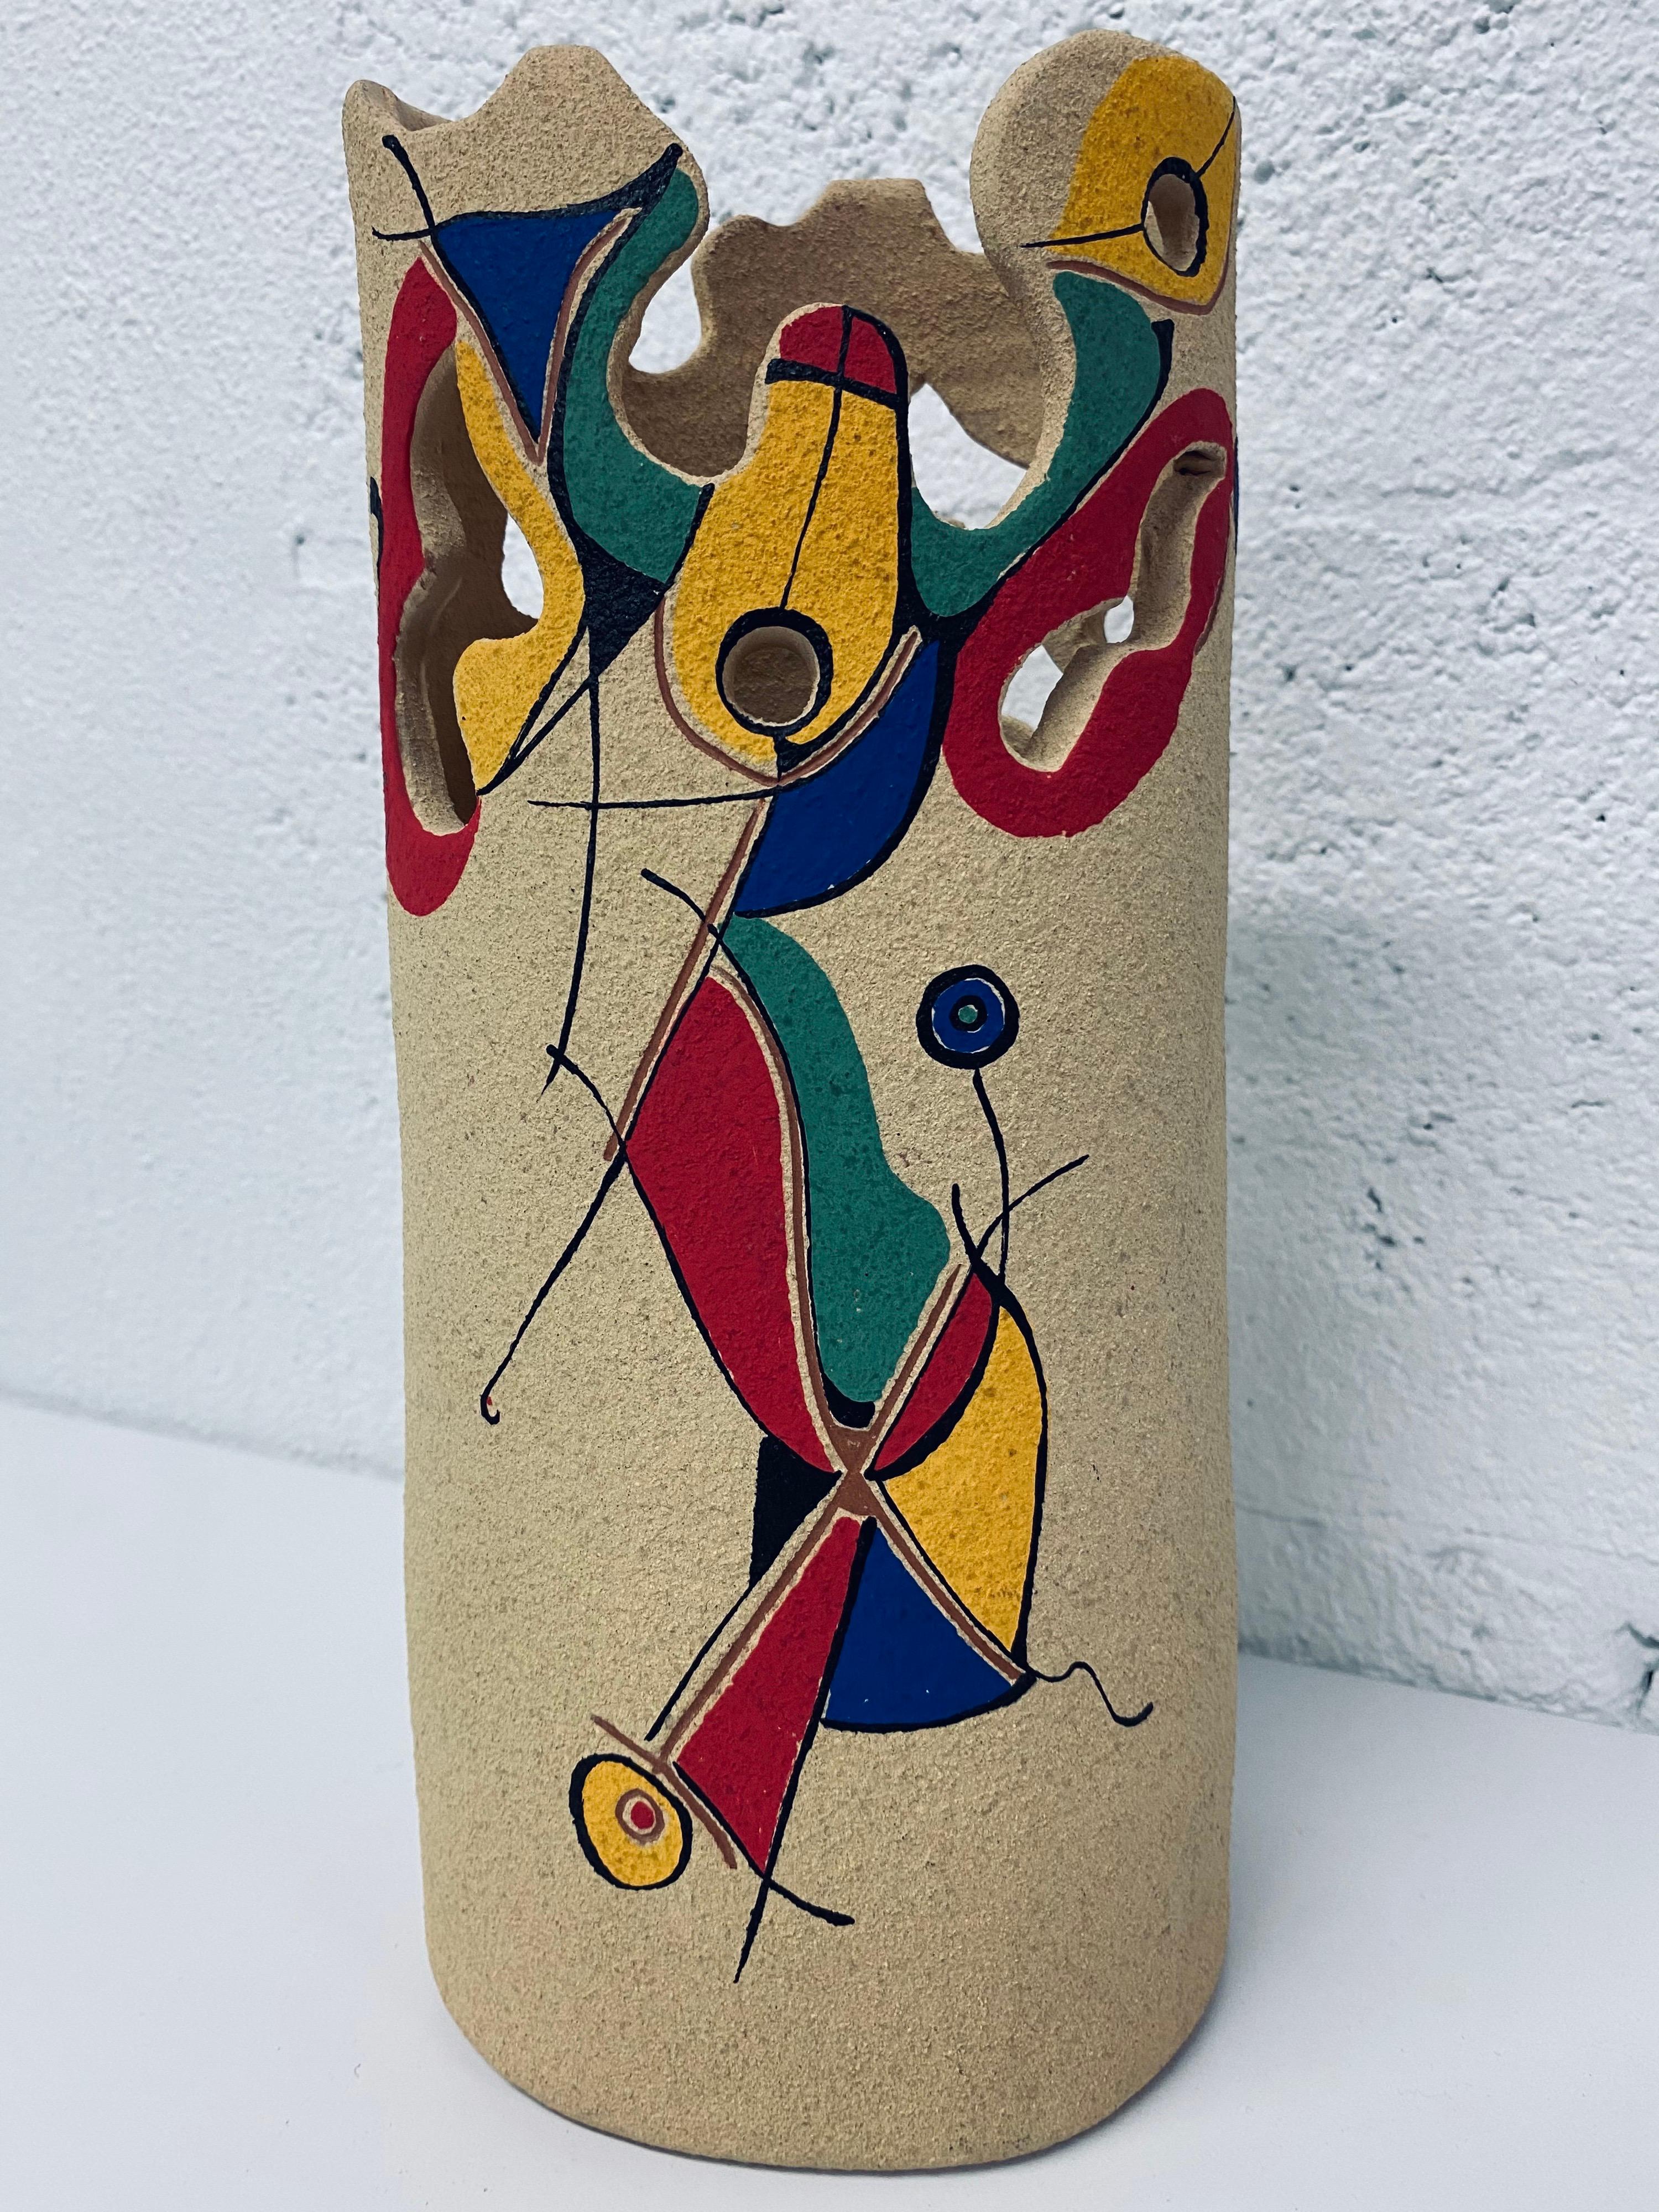 Sculptural studio pottery vase with Wassily Kandinsky qualities by renowned Spanish artist Bellon Alfareros.